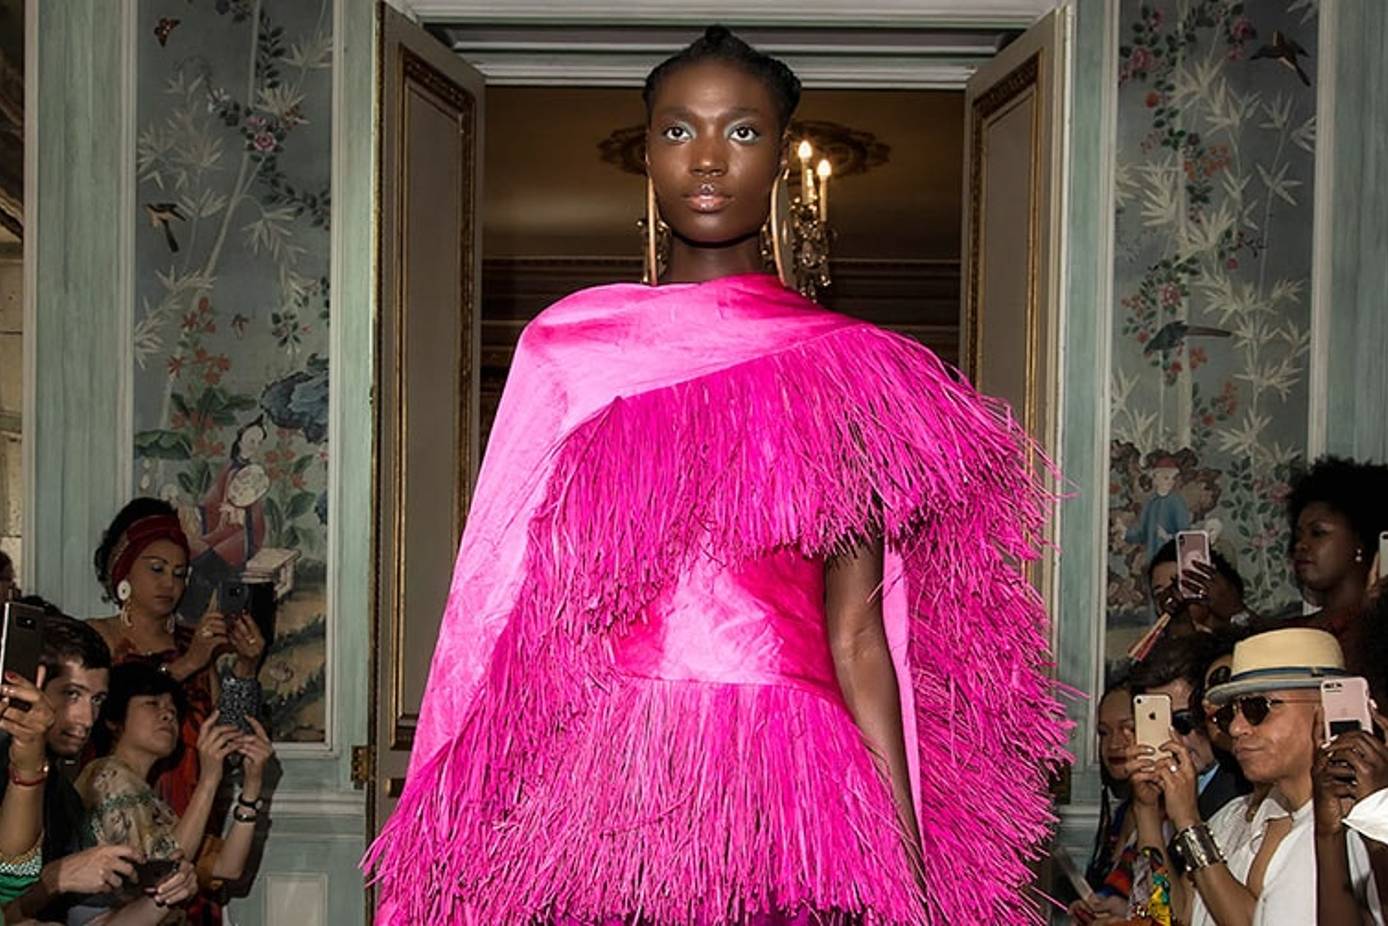 Why are Fashion shows filled with unwearable garments?